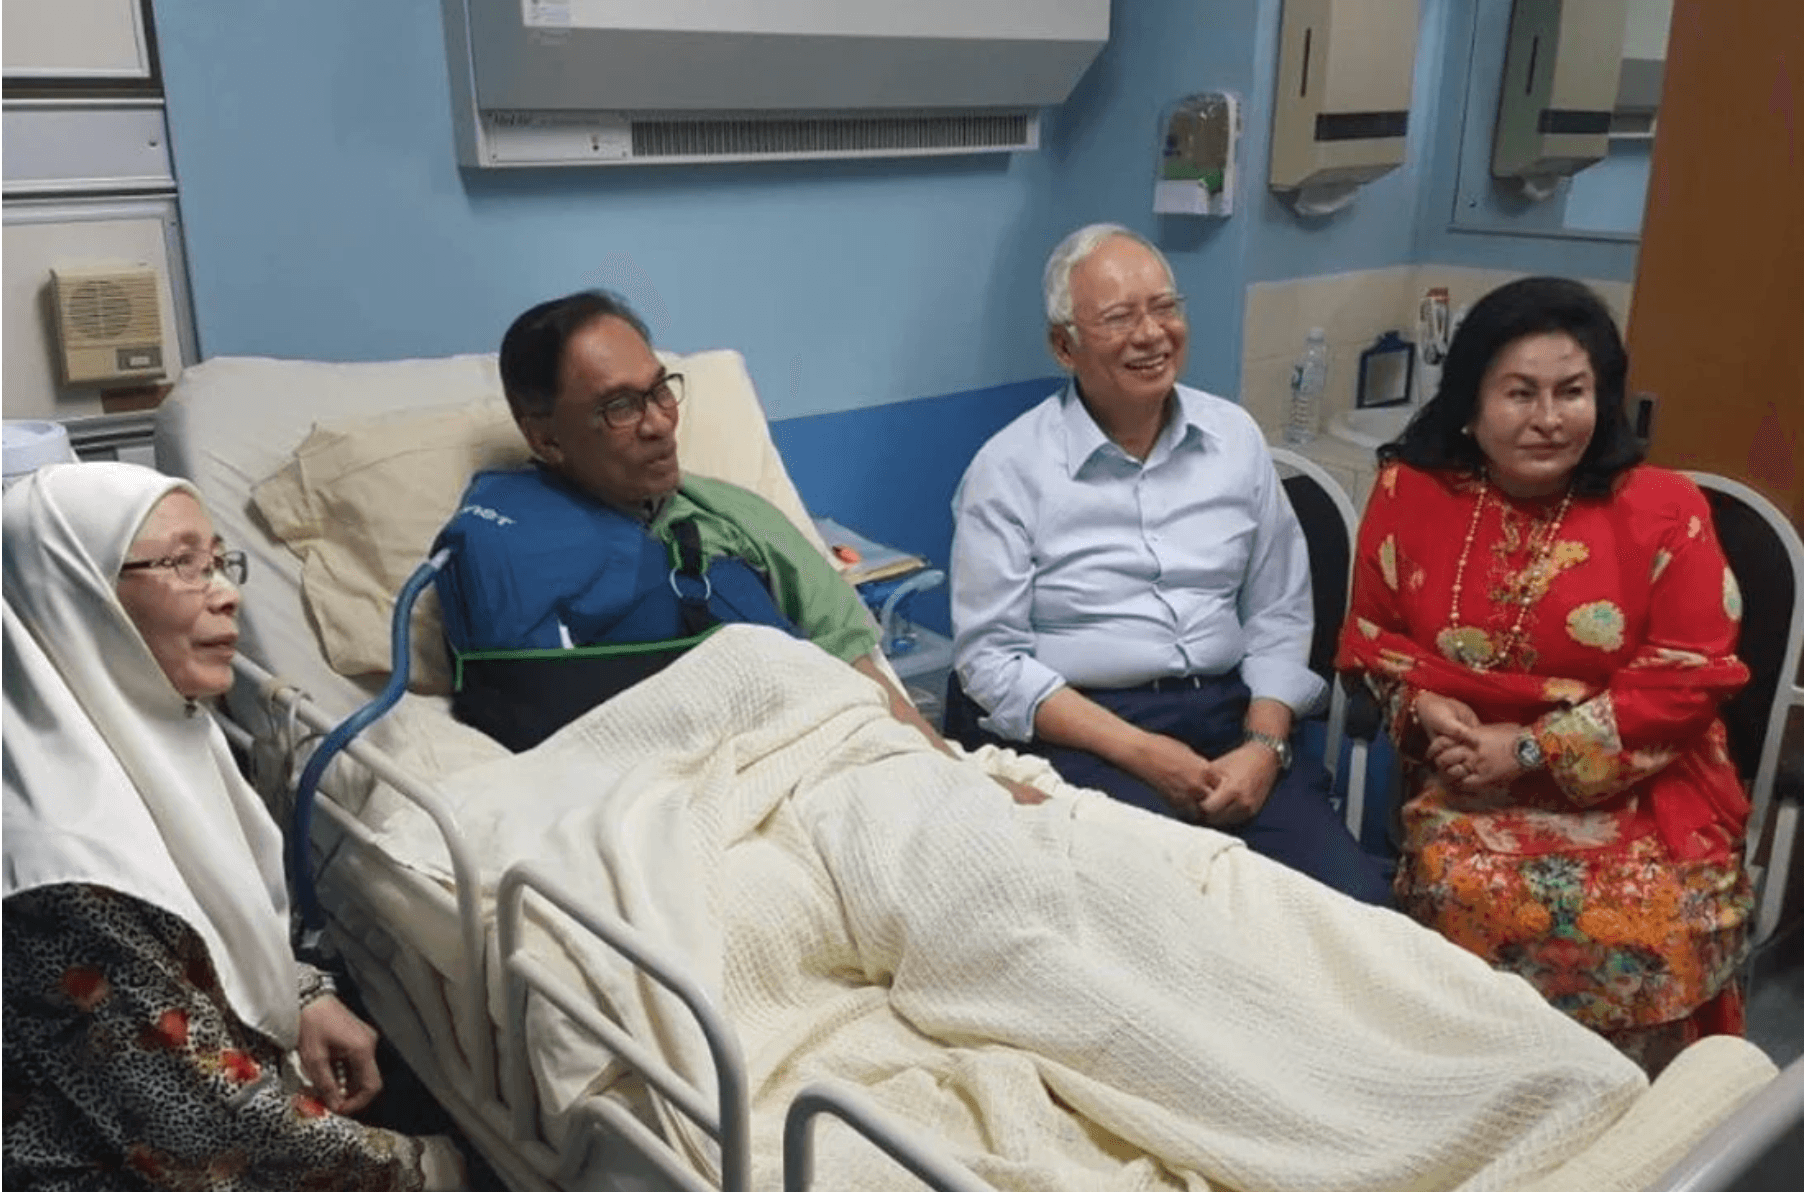 Najib Razak and Anwar Ibrahim, seen here in a 2017 meeting when the latter was hospitalised, are no longer viewed as political enemies given Najib's letter of support for Anwar to the palace in 2020. Photo: Twitter